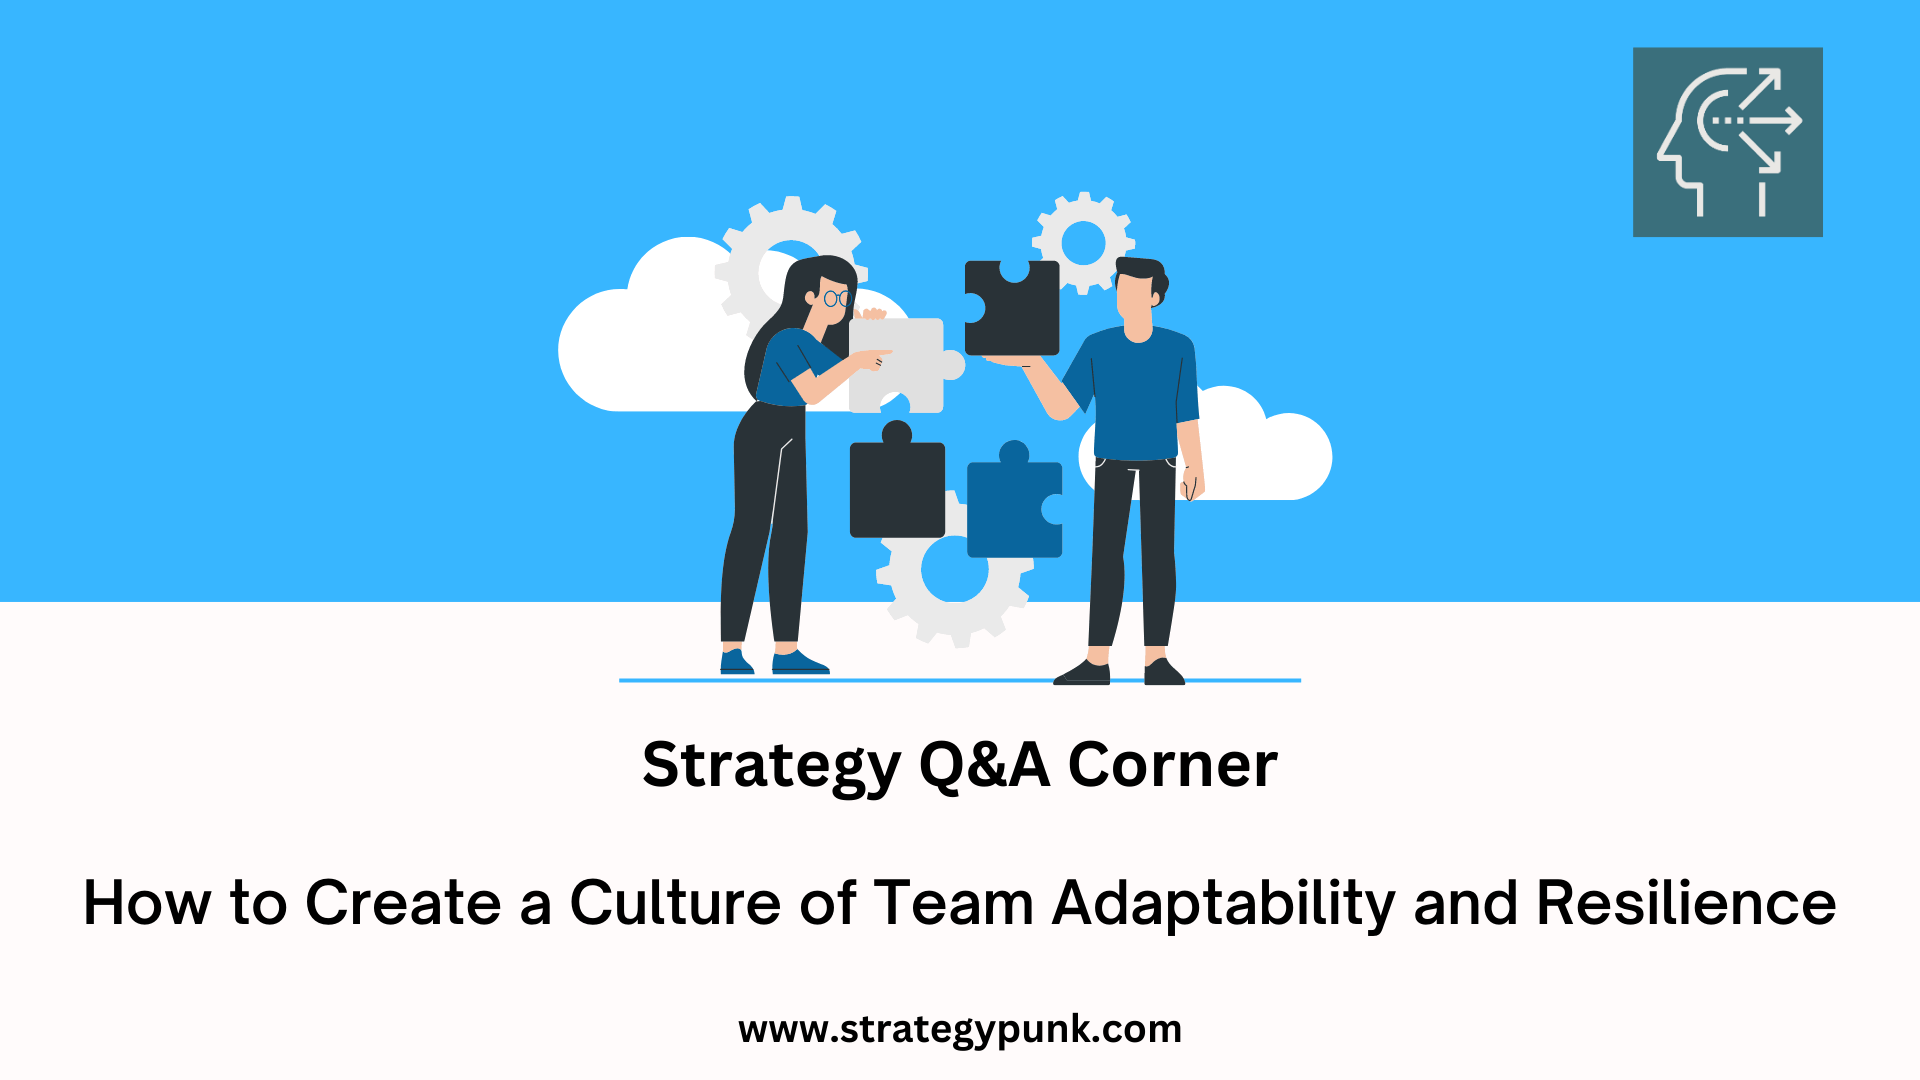 How to Create a Culture of Team Adaptability and Resilience